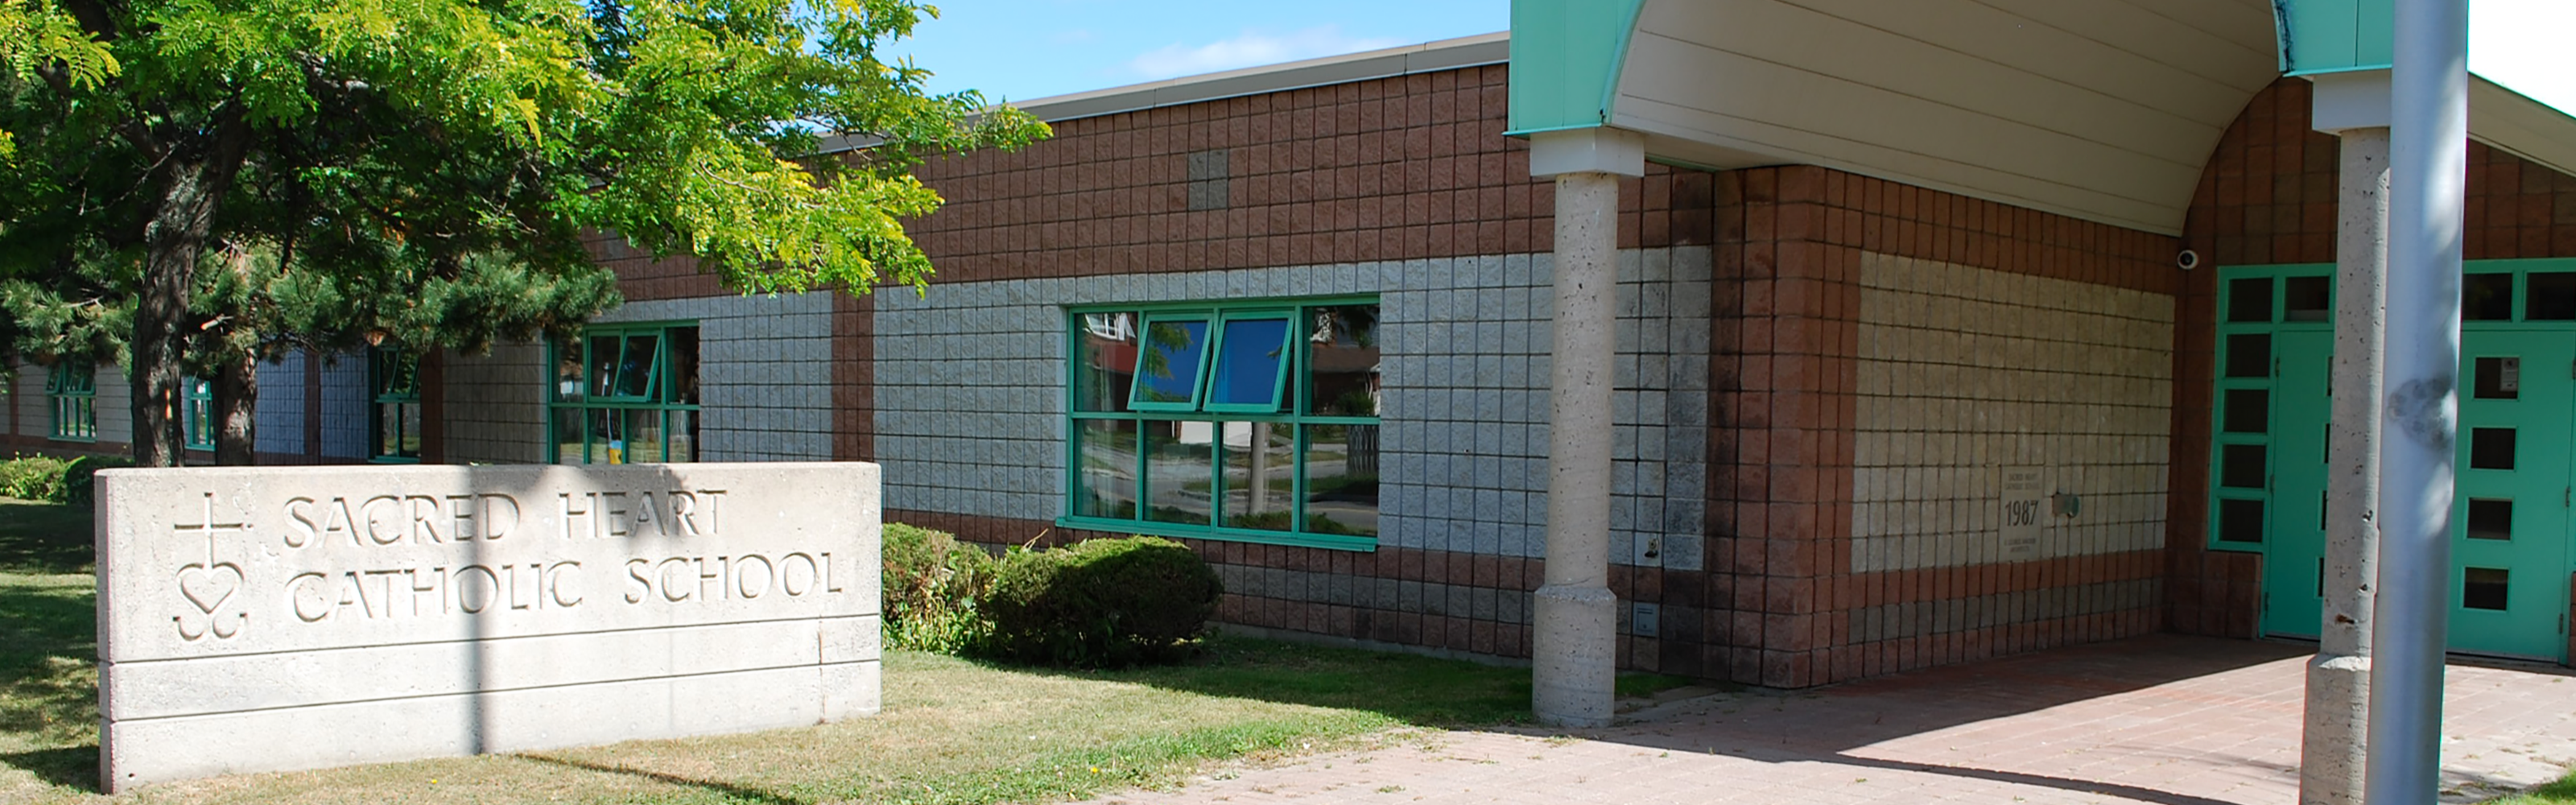 The front of the Sacred Heart Catholic School building.